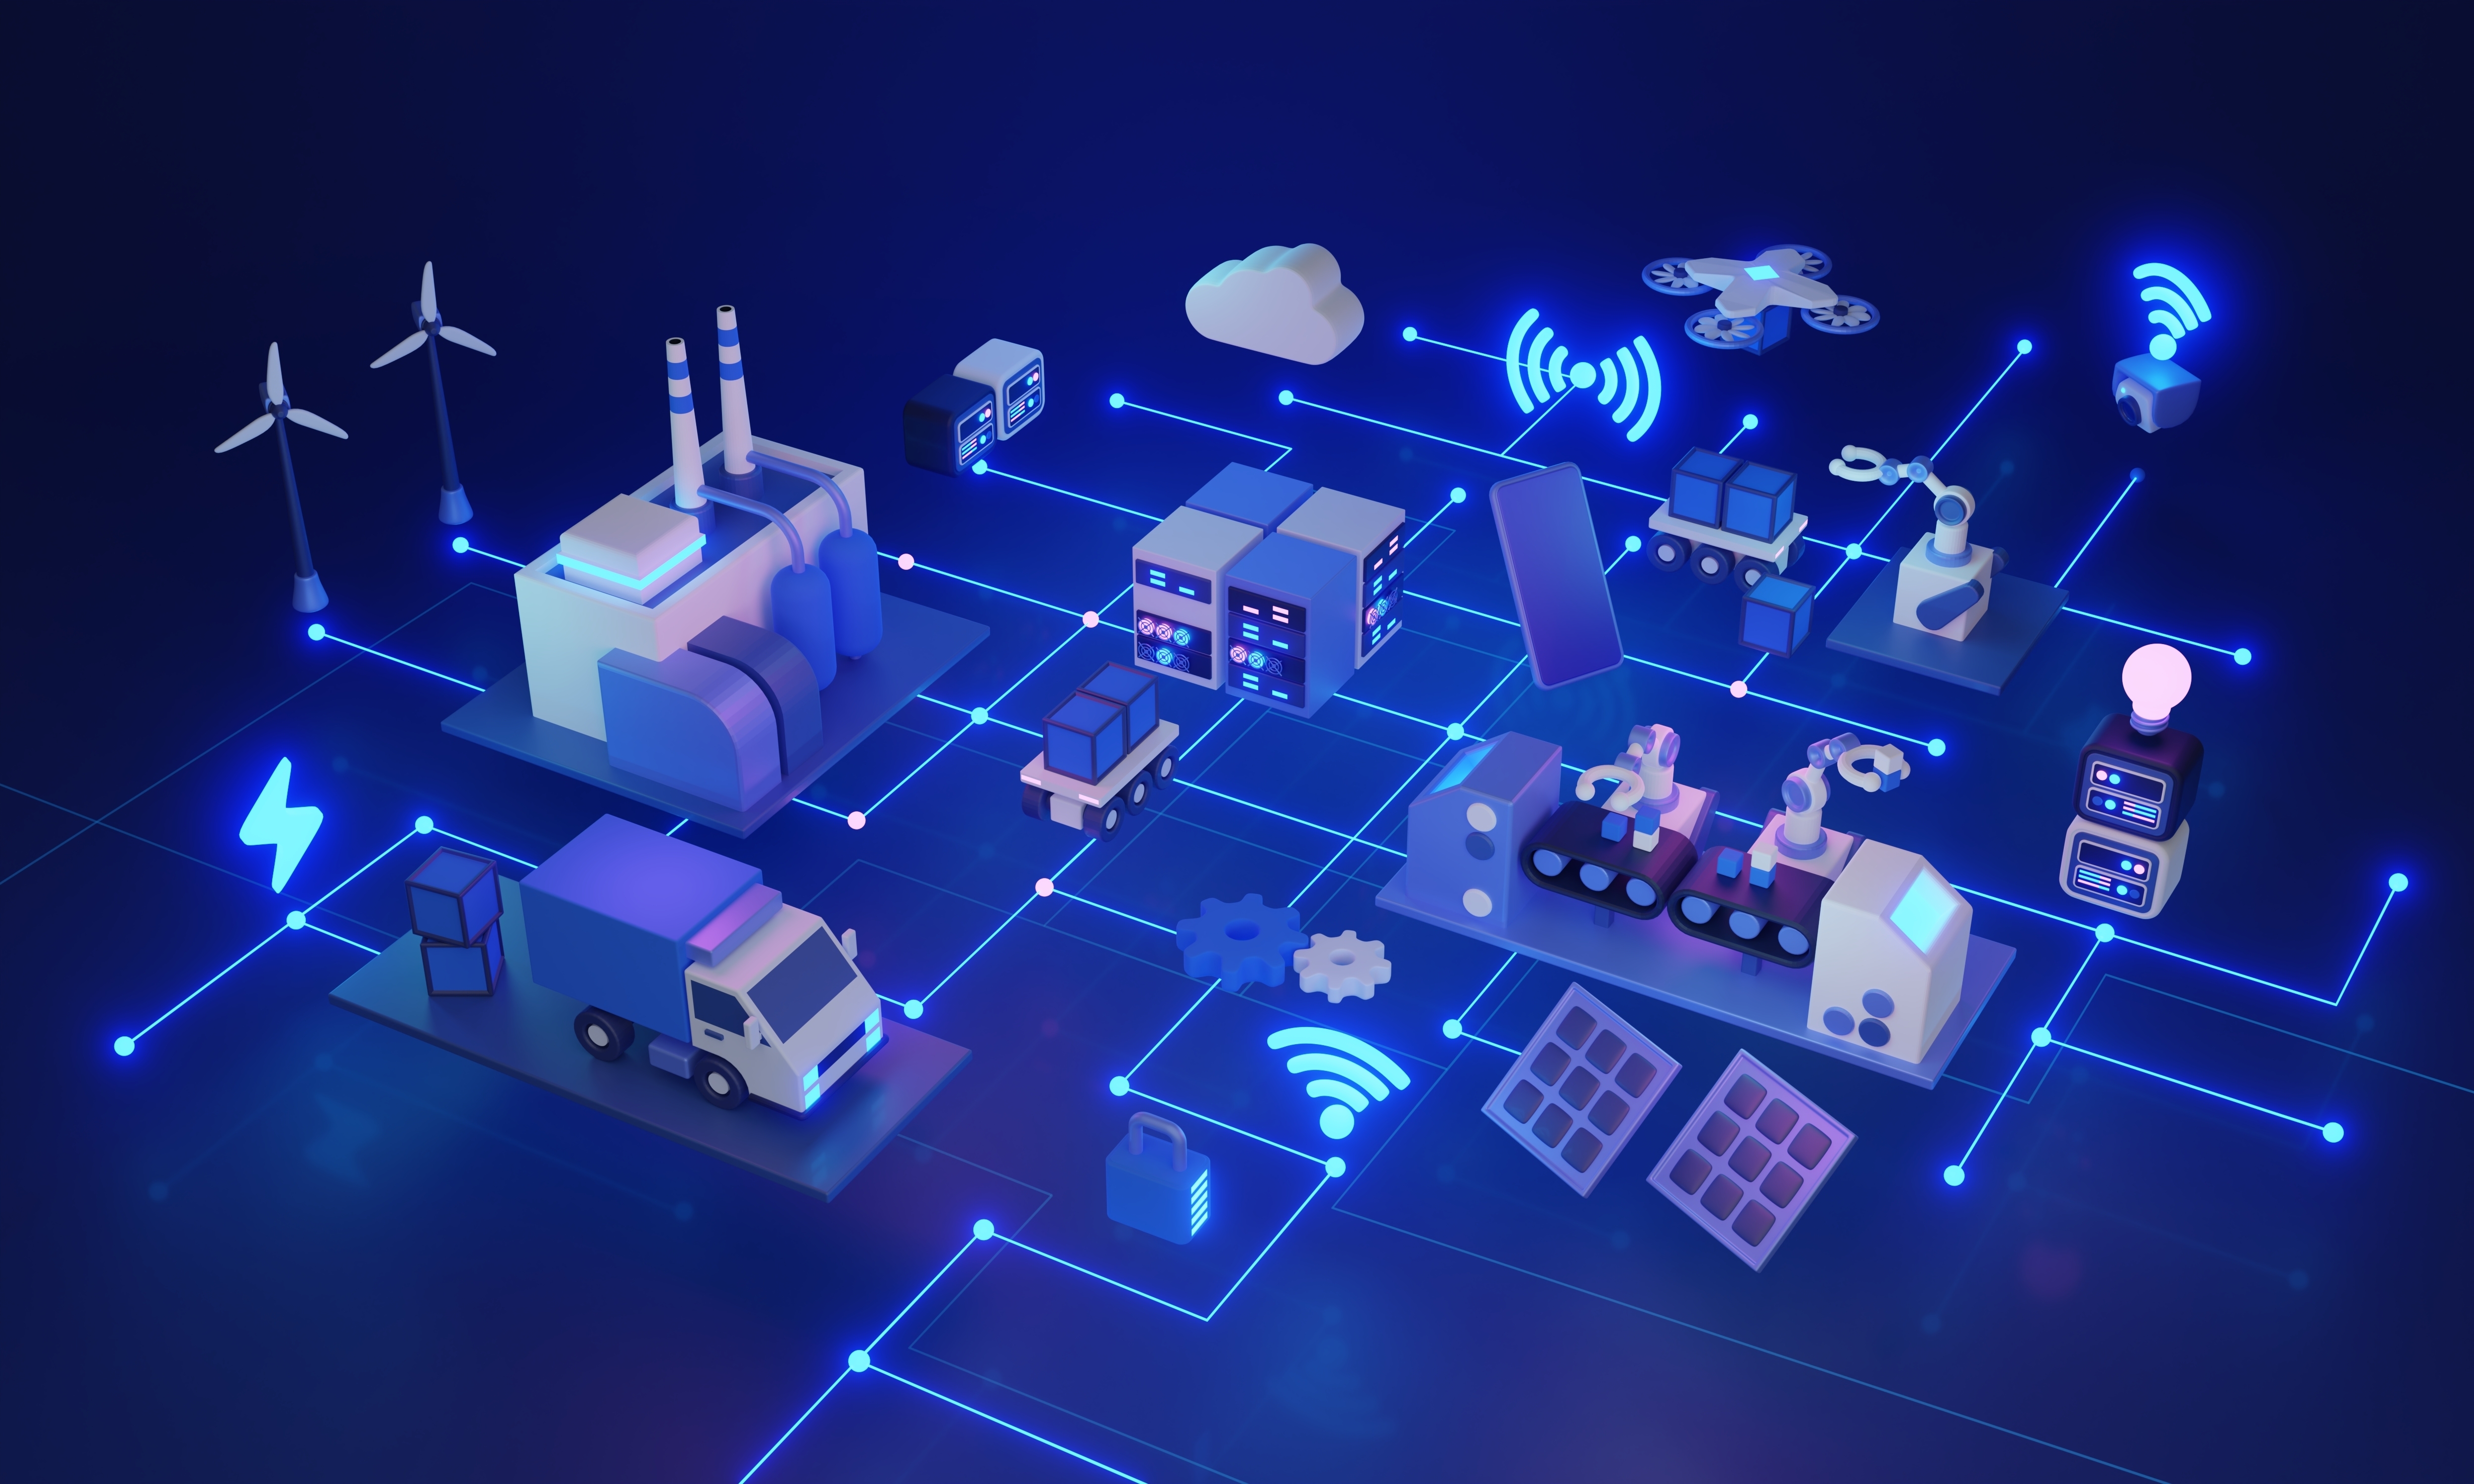 Connected Devices To Form a Smart Solution